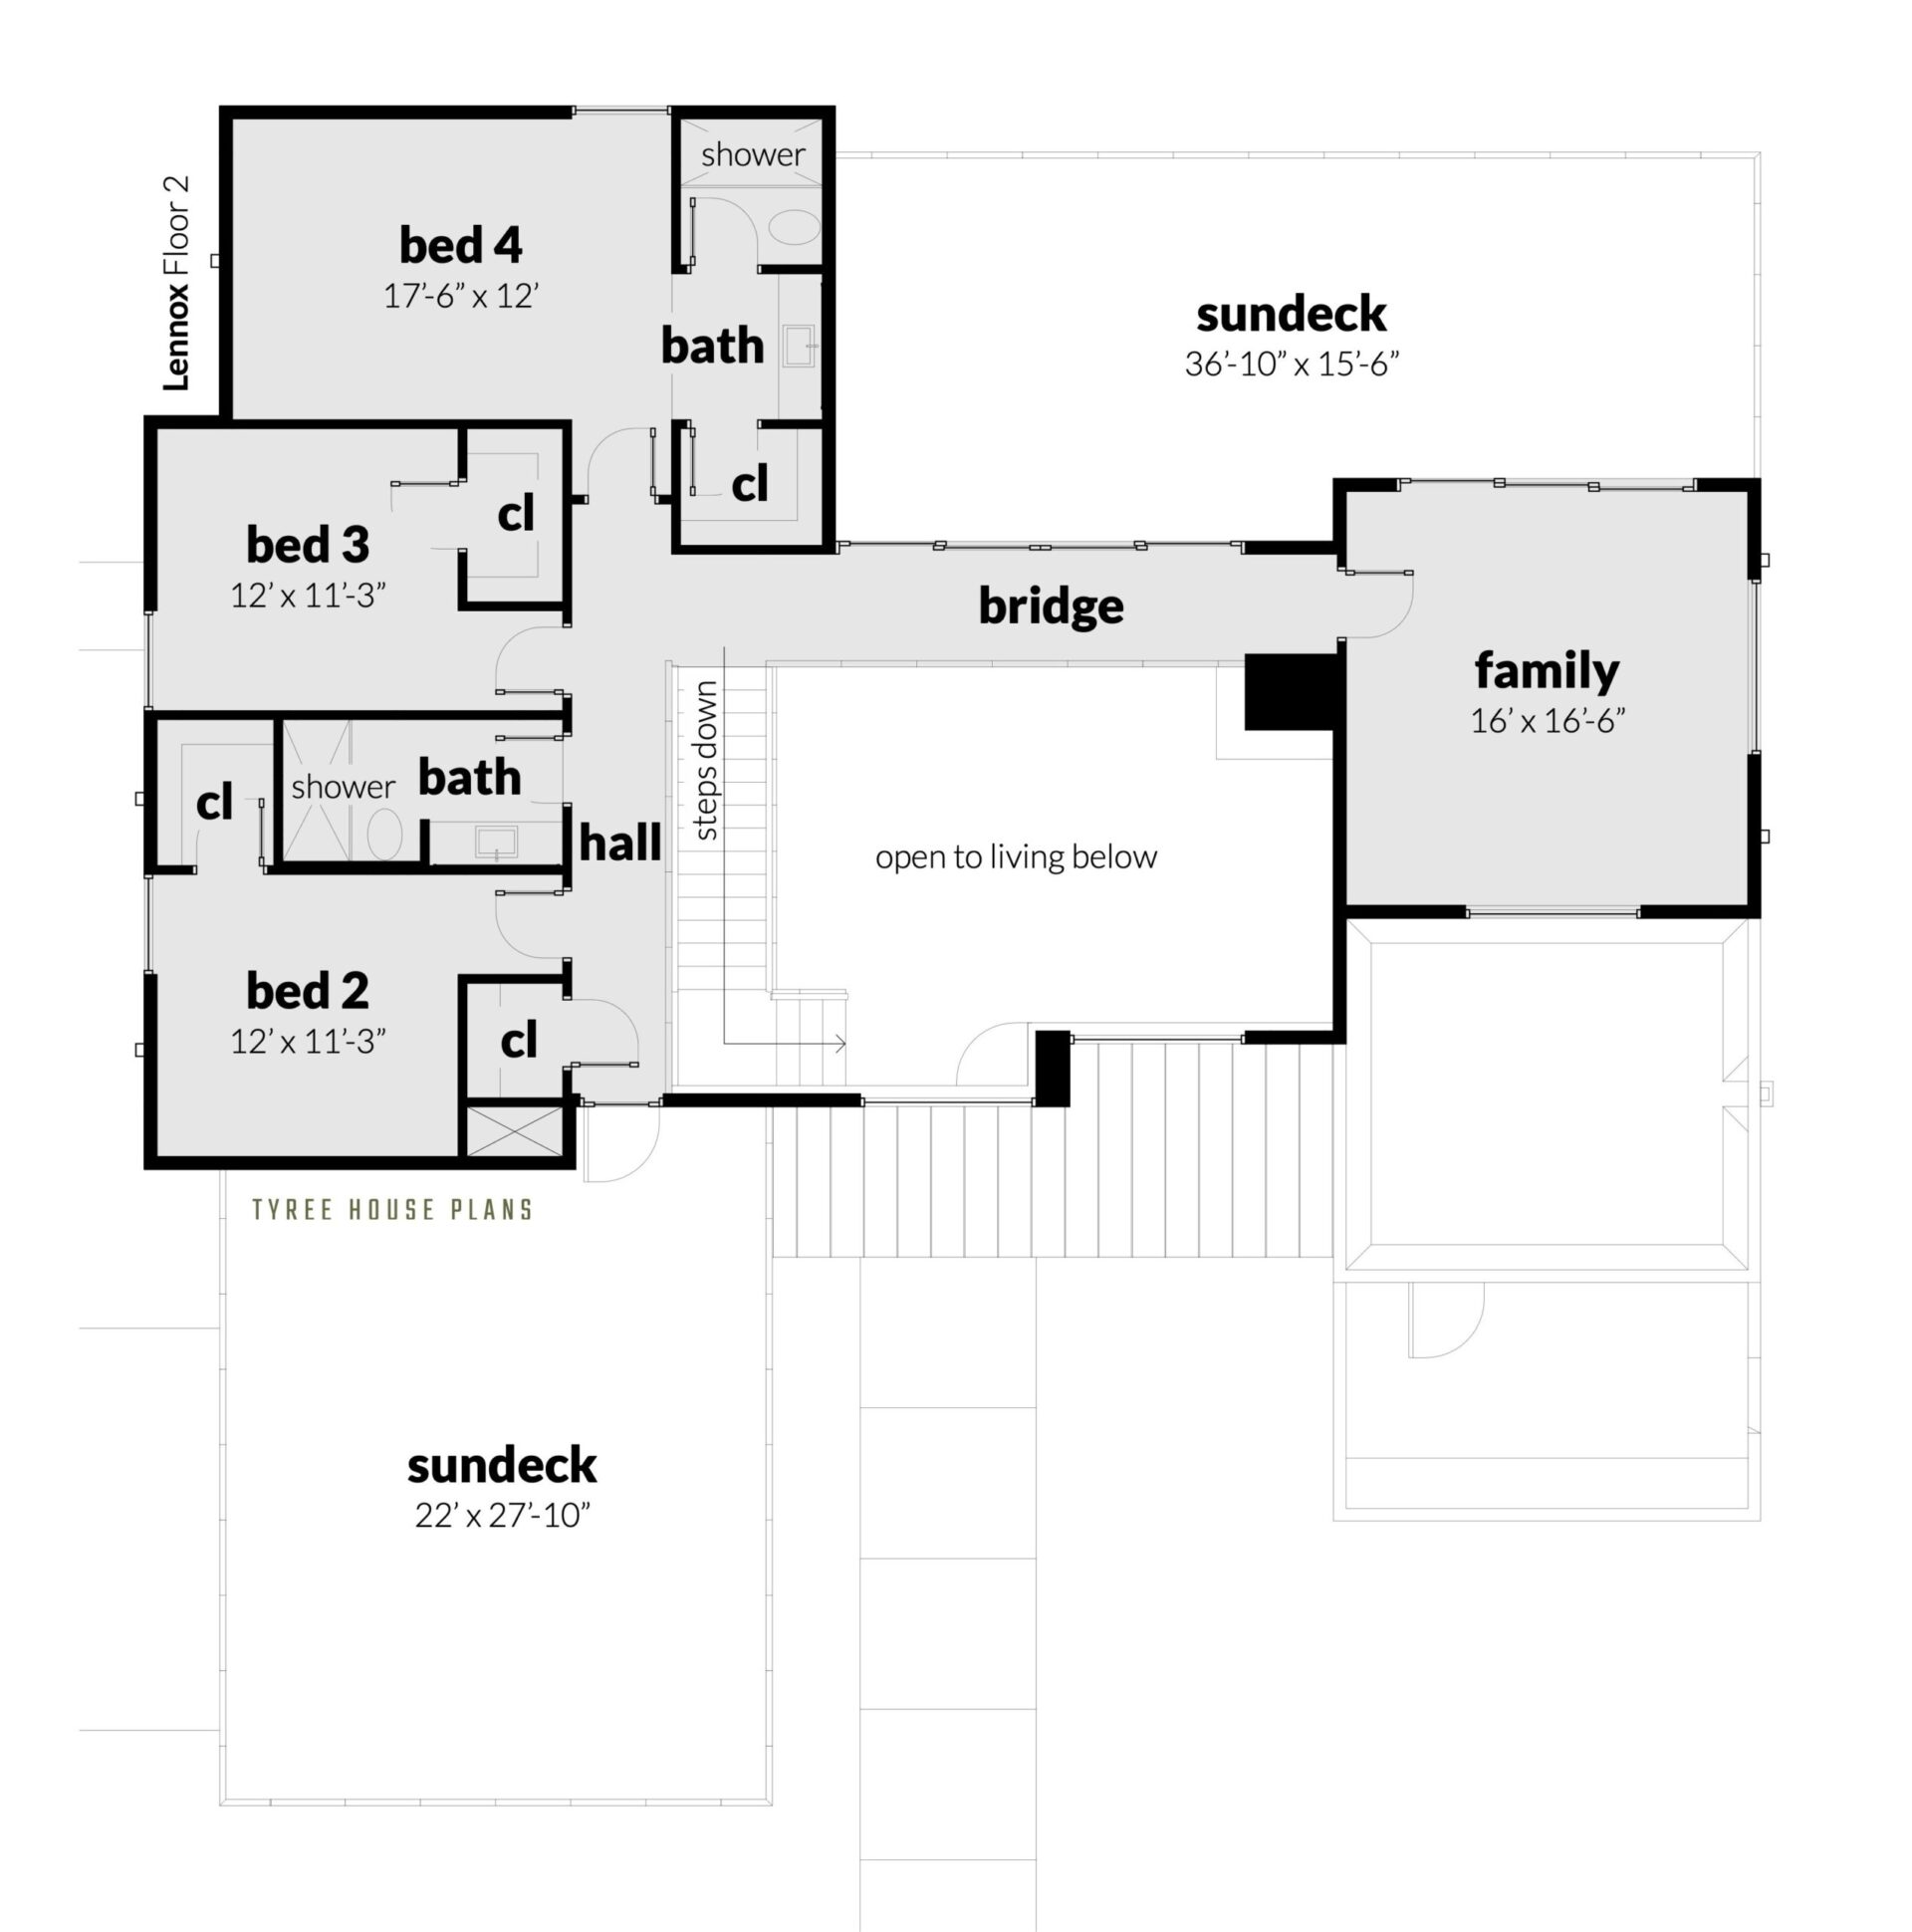 Floor 2. Lennox by Tyree House Plans